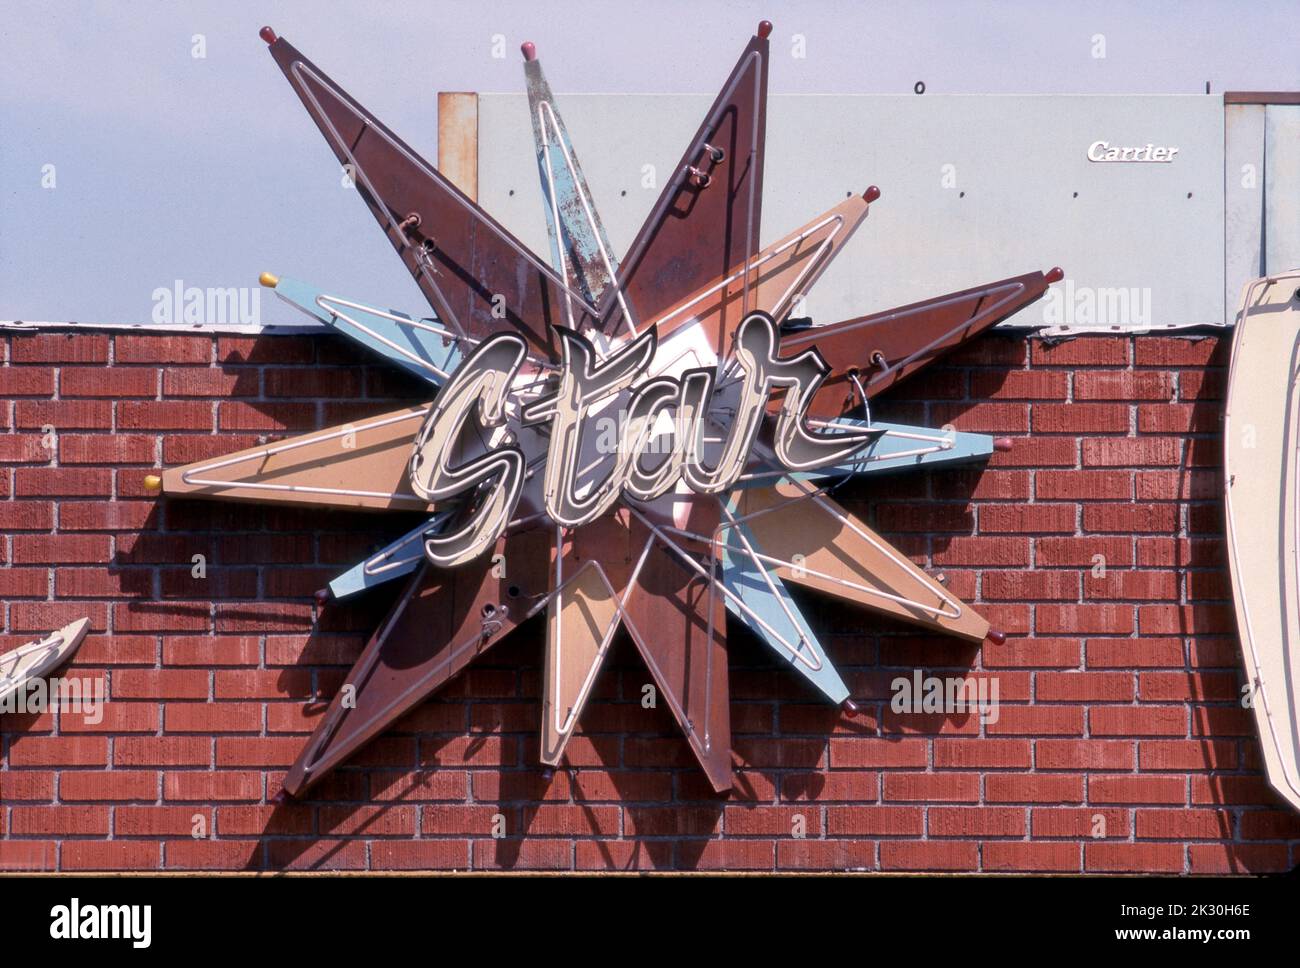 A vintage neon sign for the Star Lanes bowling alley in Hollywood, CA., probably dates to the 1960s when bowling was a popular leisure activity for Americans and most towns had at least one bowling alley. Stock Photo